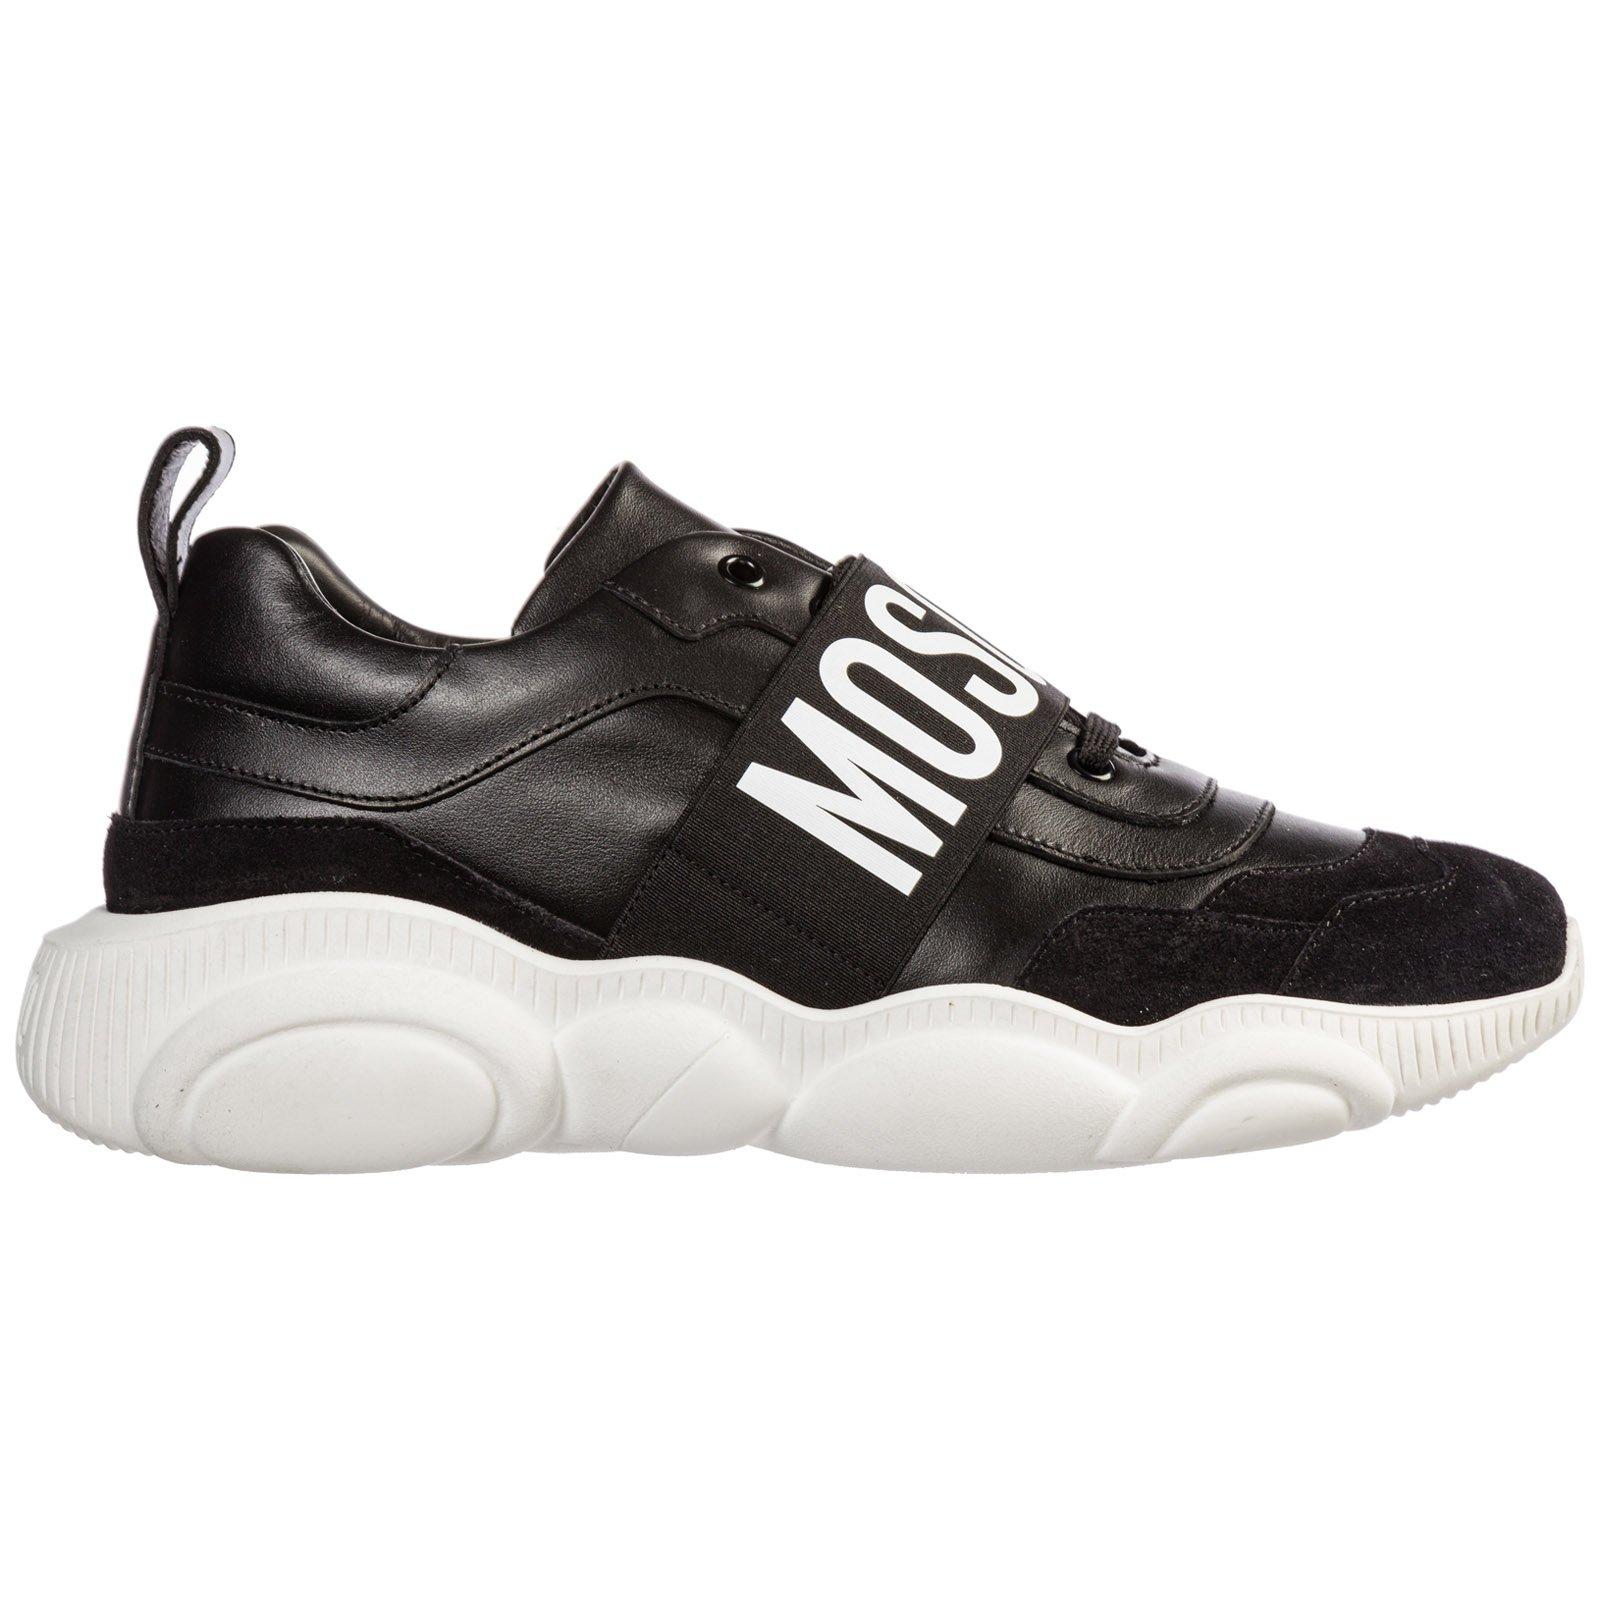 Moschino Leather Logo Strap Low Top Sneakers in Black for Men - Lyst